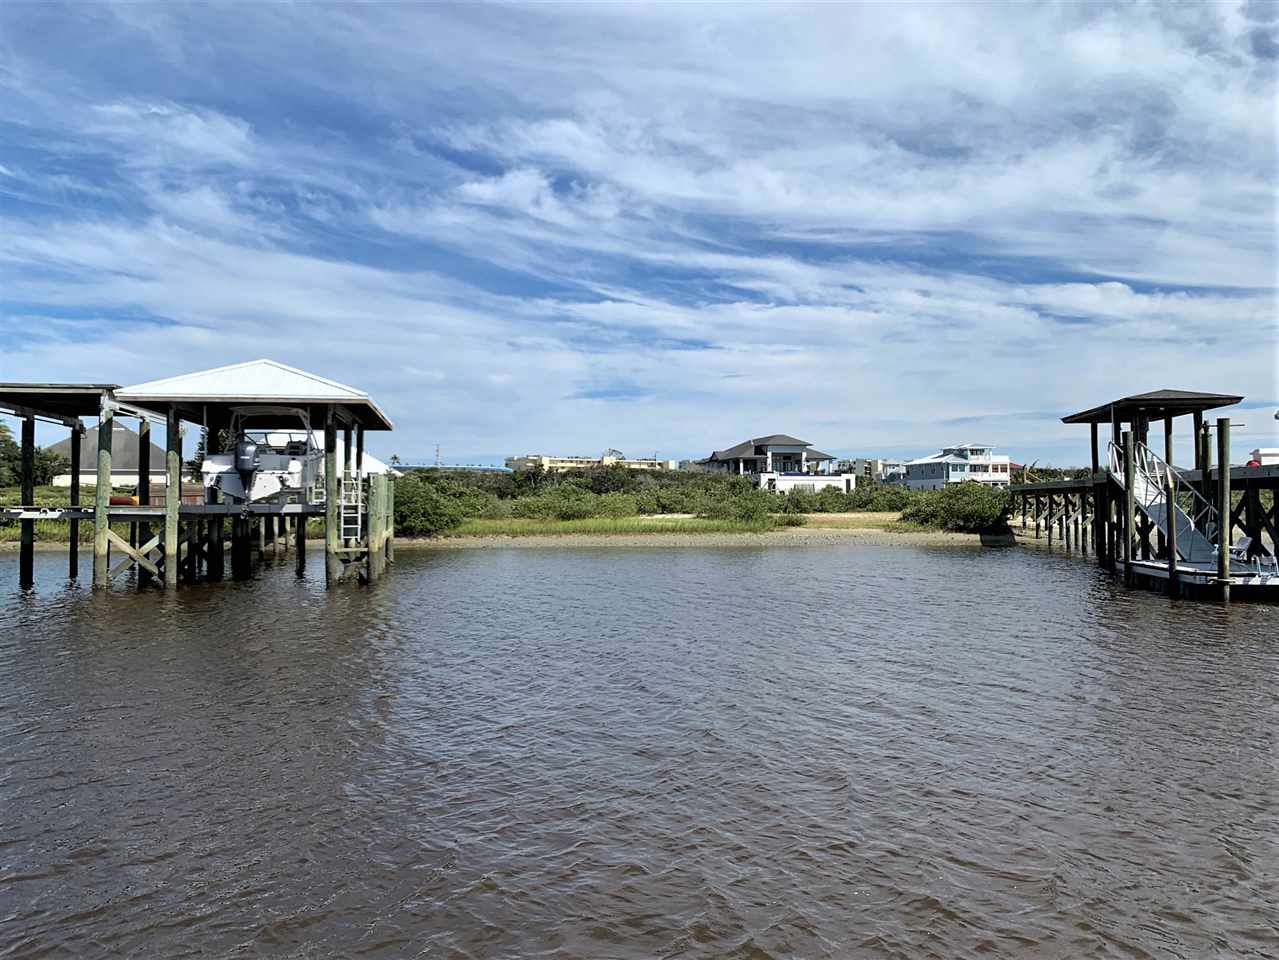 Sunset Lovers! 1 acre deepwater lot on the Intracoastal waterway! Located in Crescent Beach, this lot is over 500ft deep, build your dream home well off the road and enjoy stunning views of the water, wildlife and nature at its best. Now is the perfect time to make your dreams come true with this prime waterfront property.